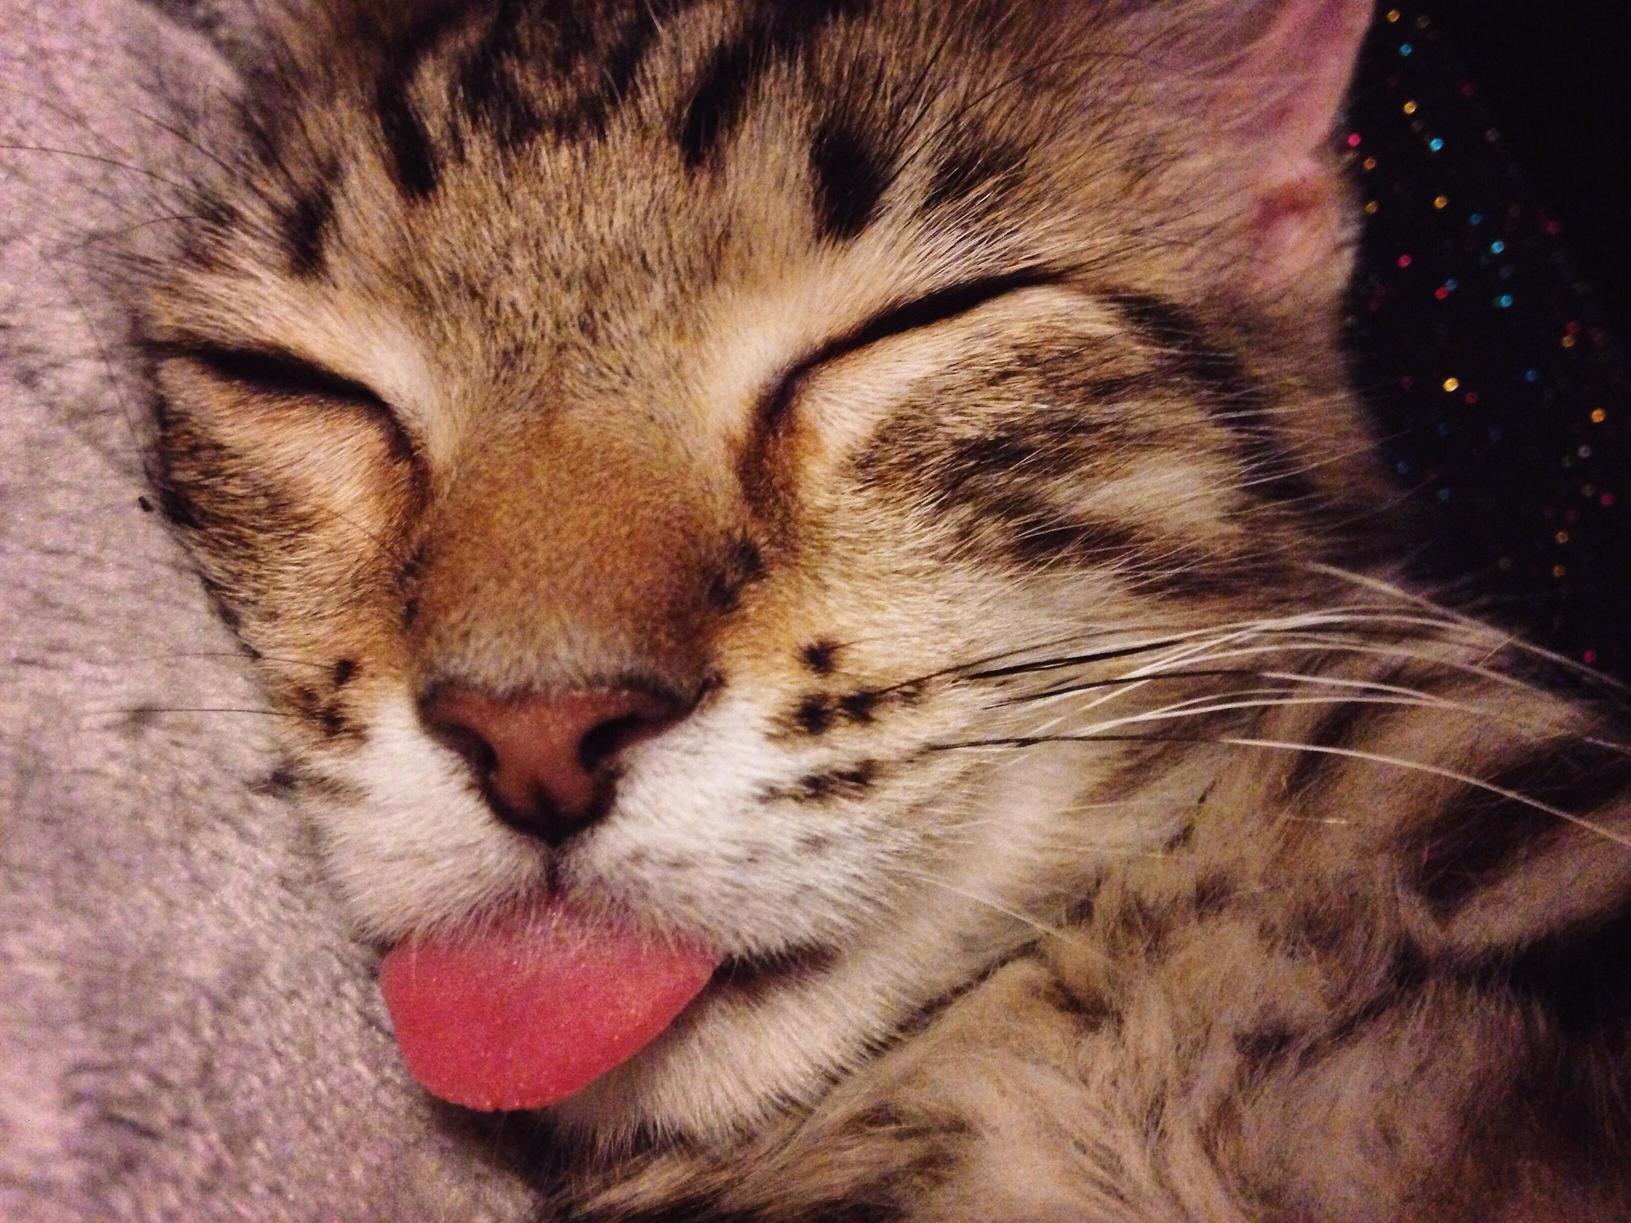 The ultimate blep